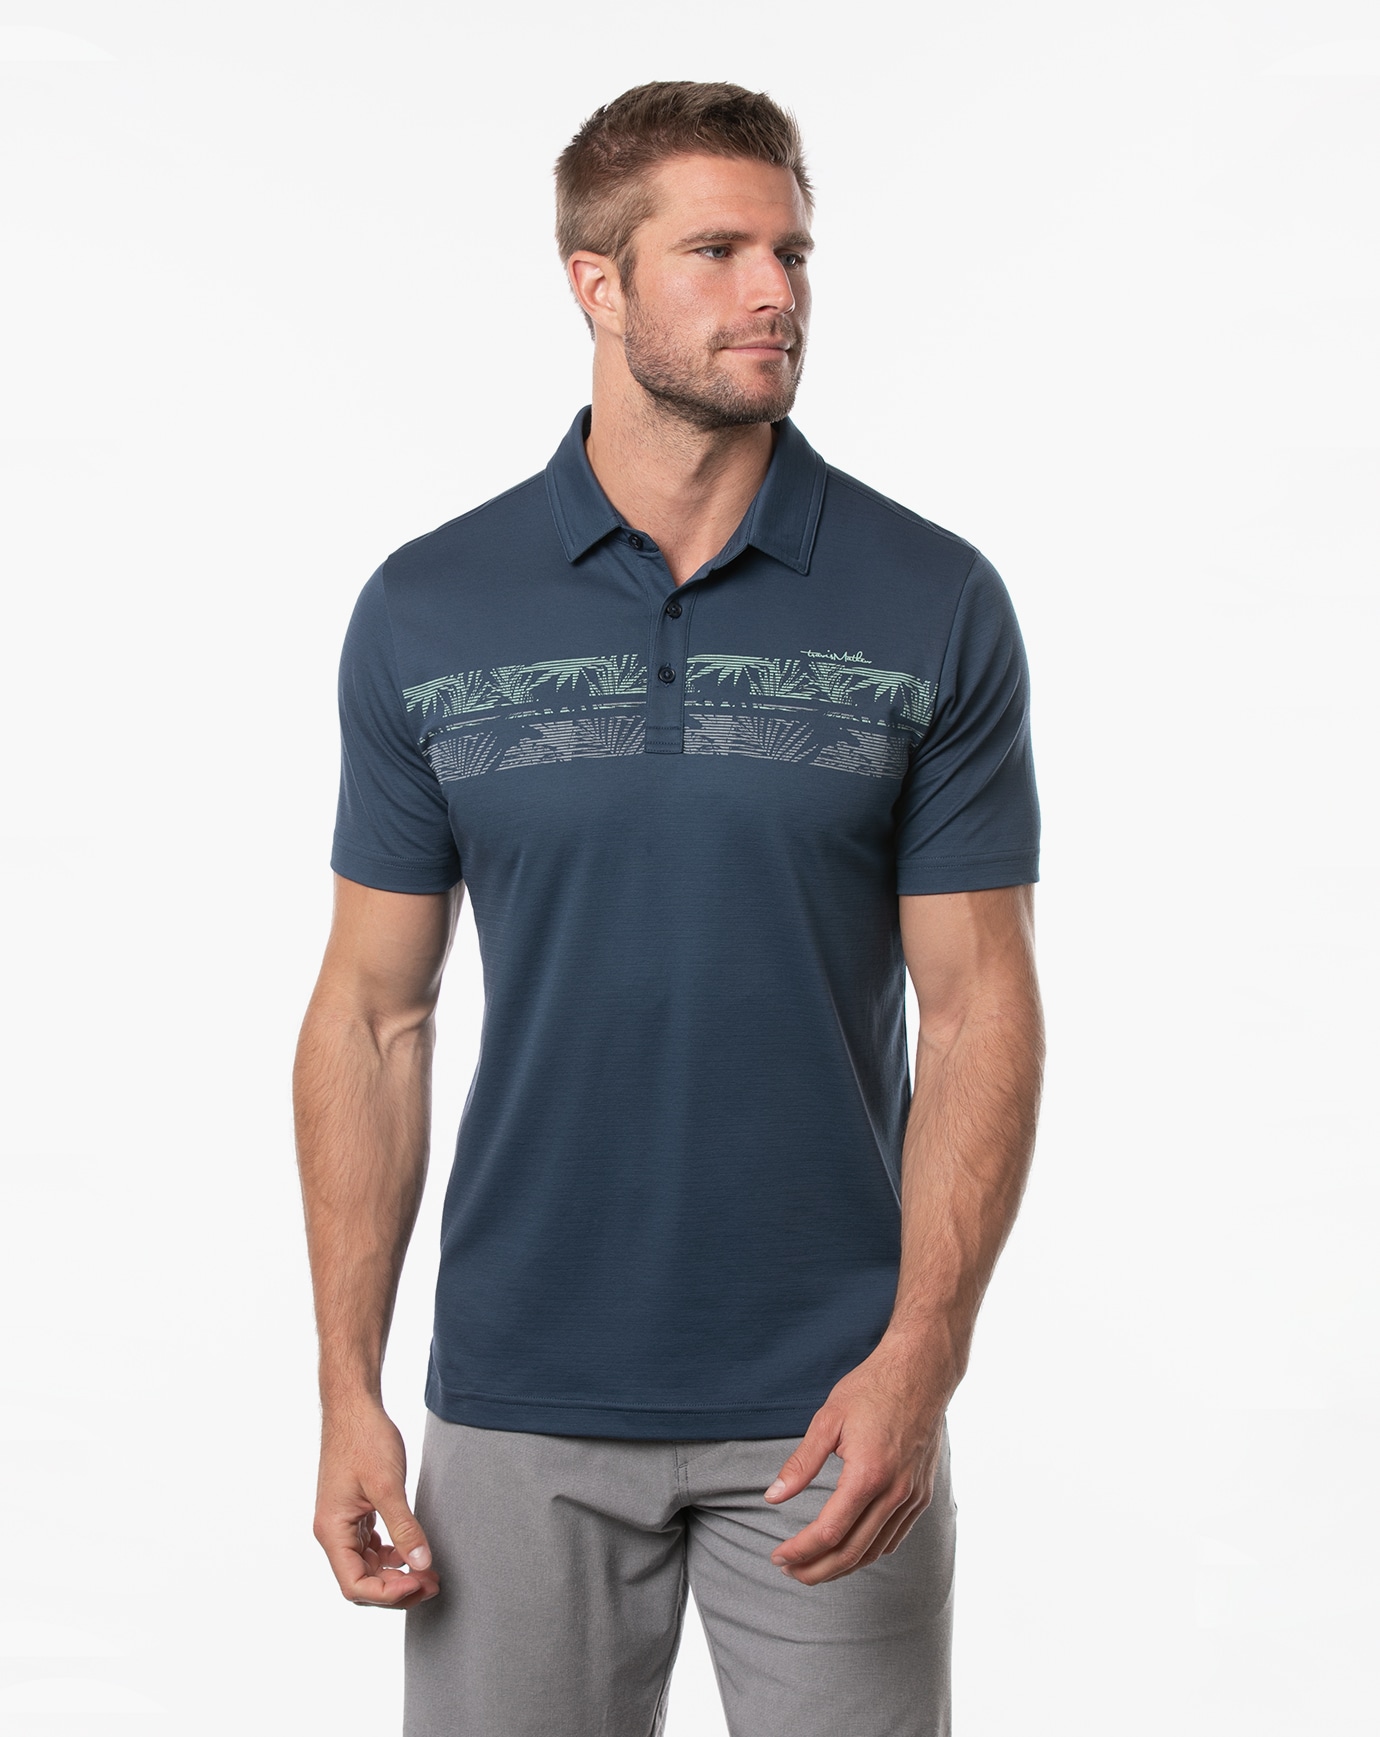 Related Product - DROP ANCHOR POLO